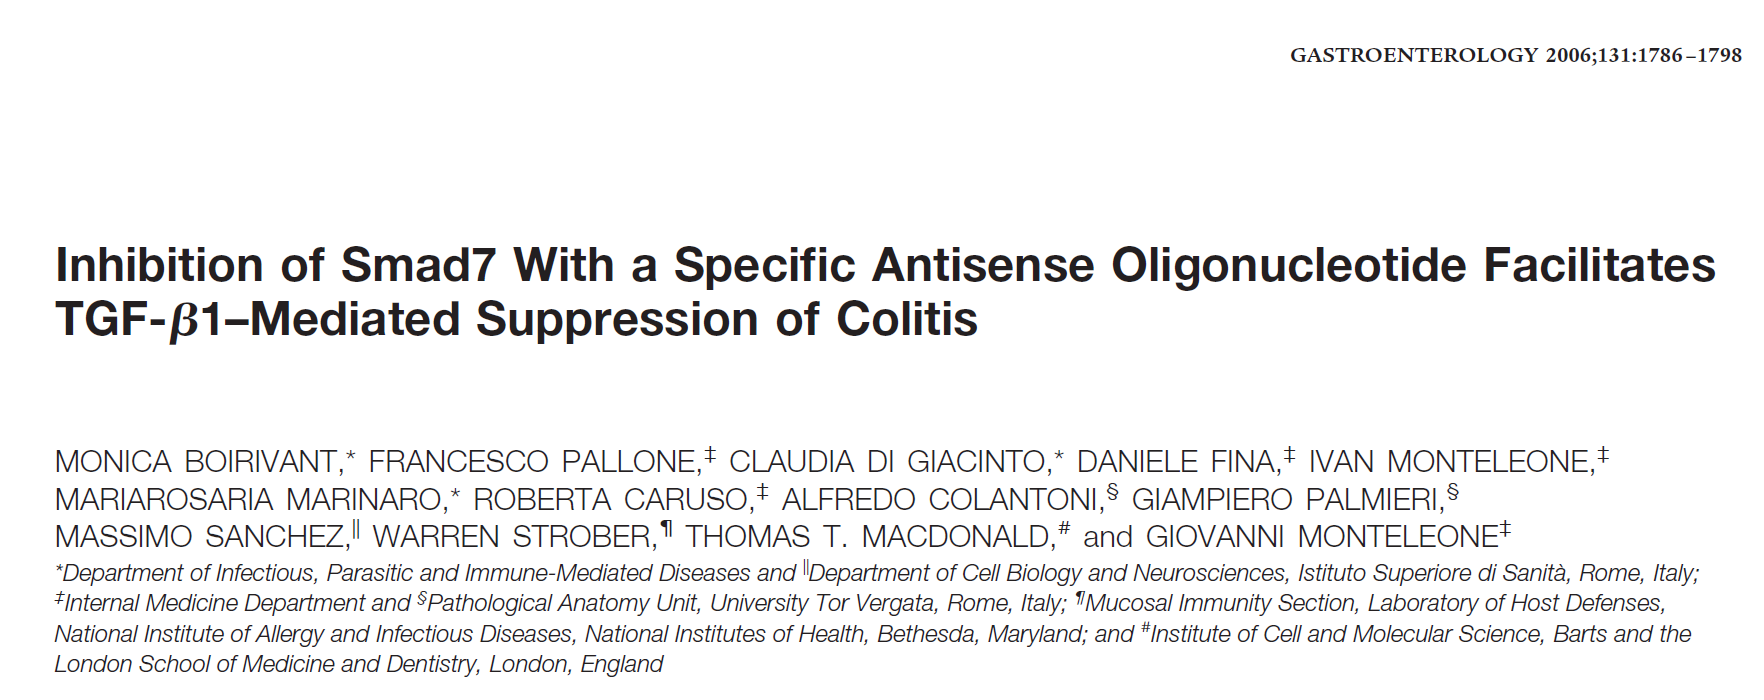 Inhibition of Smad7 With a Specific Antisense Oligonucleotide Facilitates TGF-β1–Mediated Suppression of Colitis